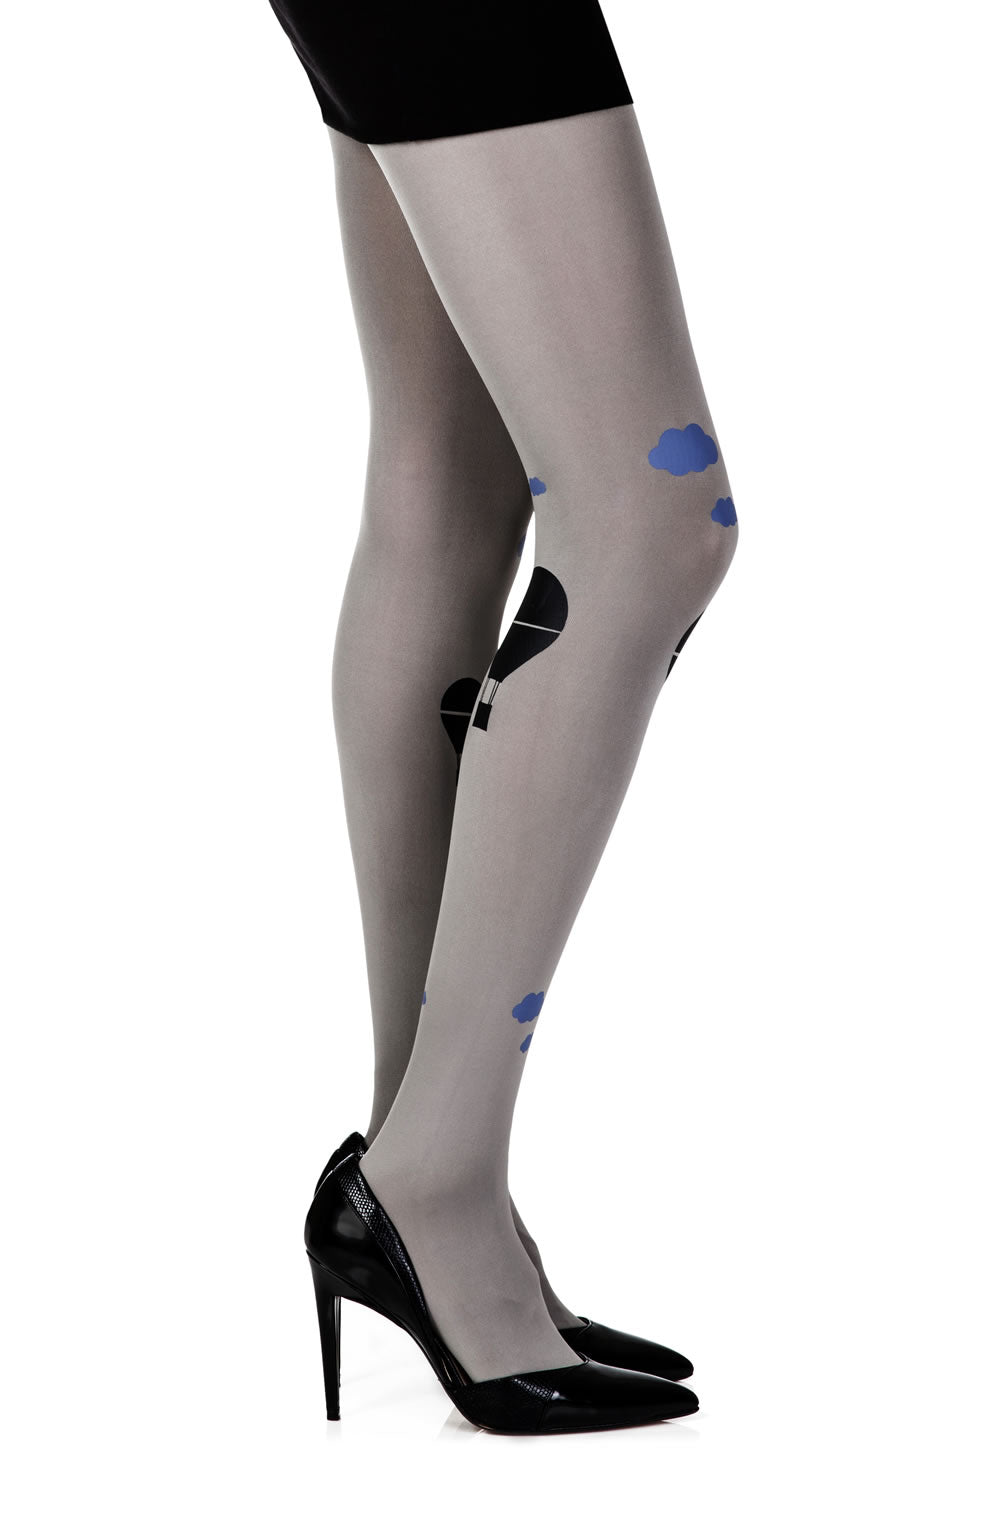 Zohara “Hot Air Balloon” Grey Print Tights  Hosiery, NEWLY-IMPORTED, Tights, Zohara - So Luxe Lingerie